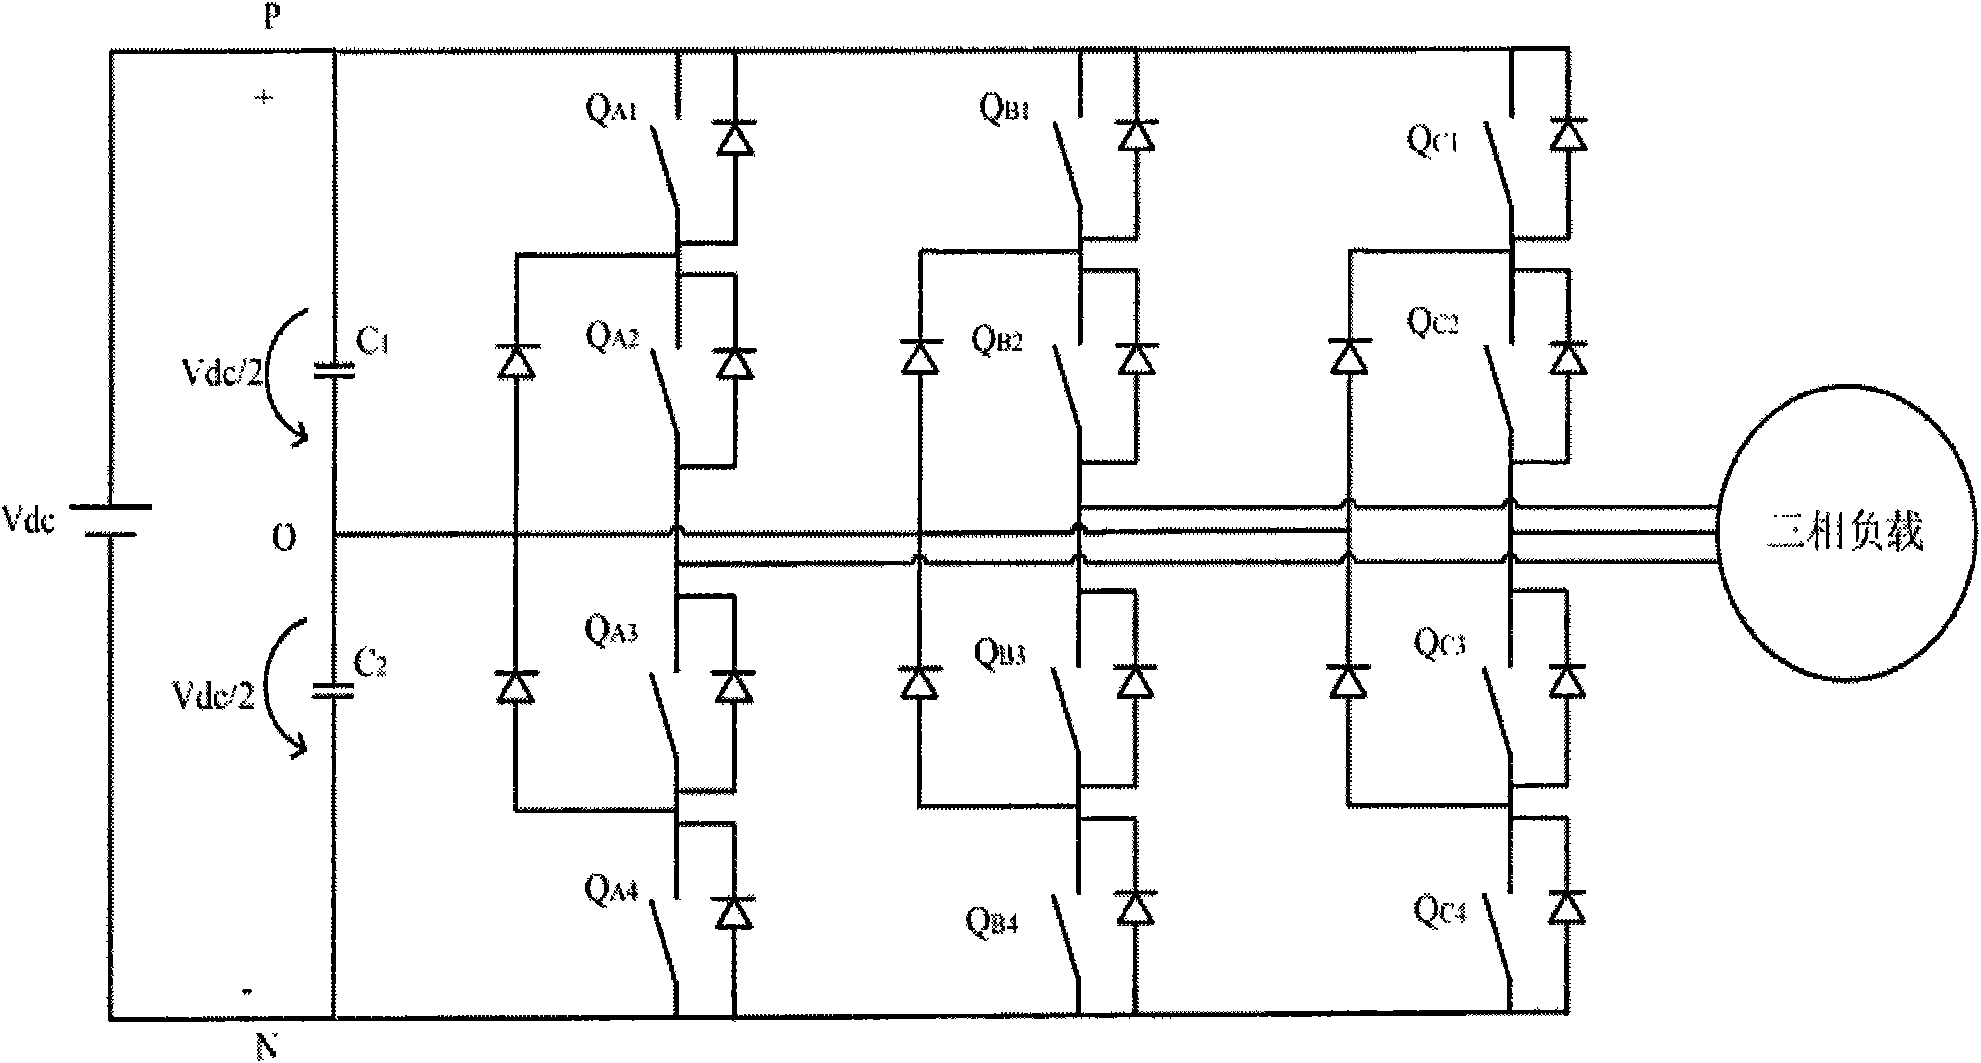 Tri-level zero-current conversion soft switching inverter of active middle voltage clamp